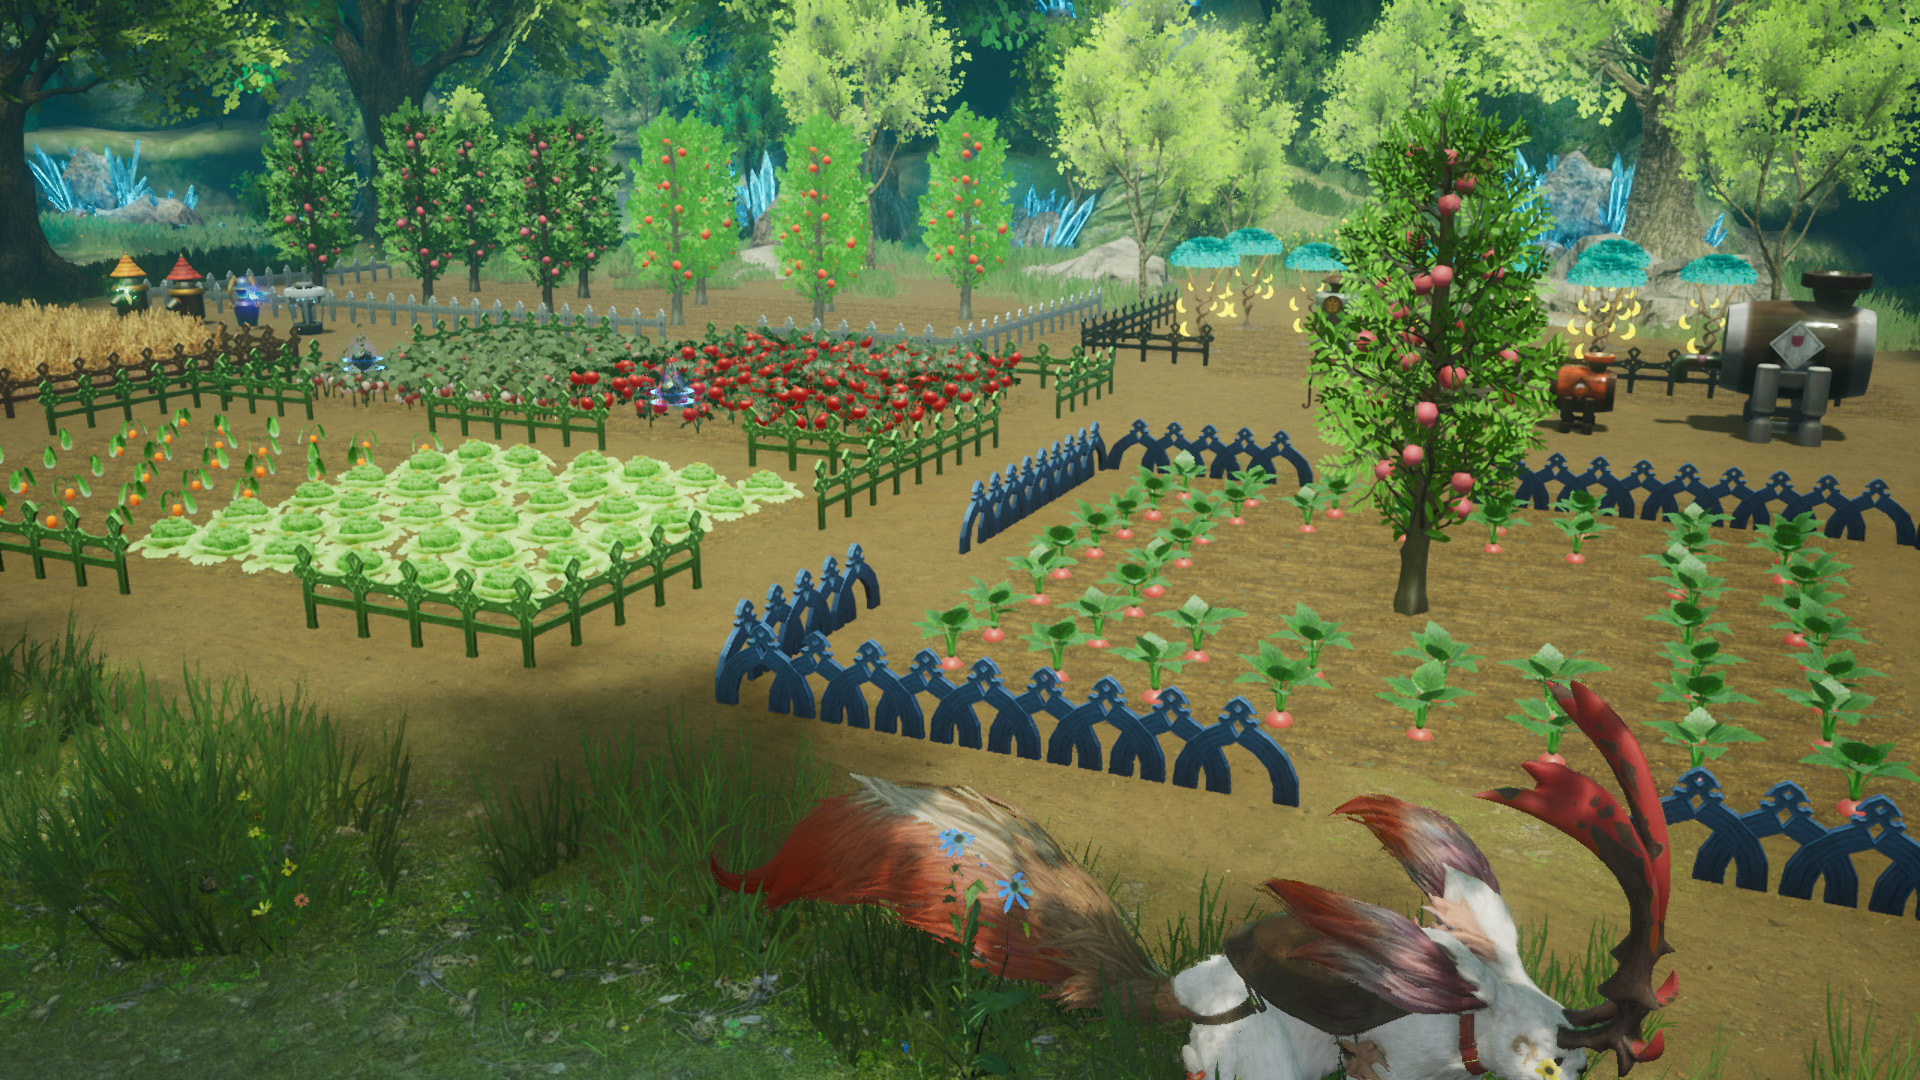 A screenshot from Harvestella. We see a garden with plants and trees. A wild animal scurries across the bottom of the image.